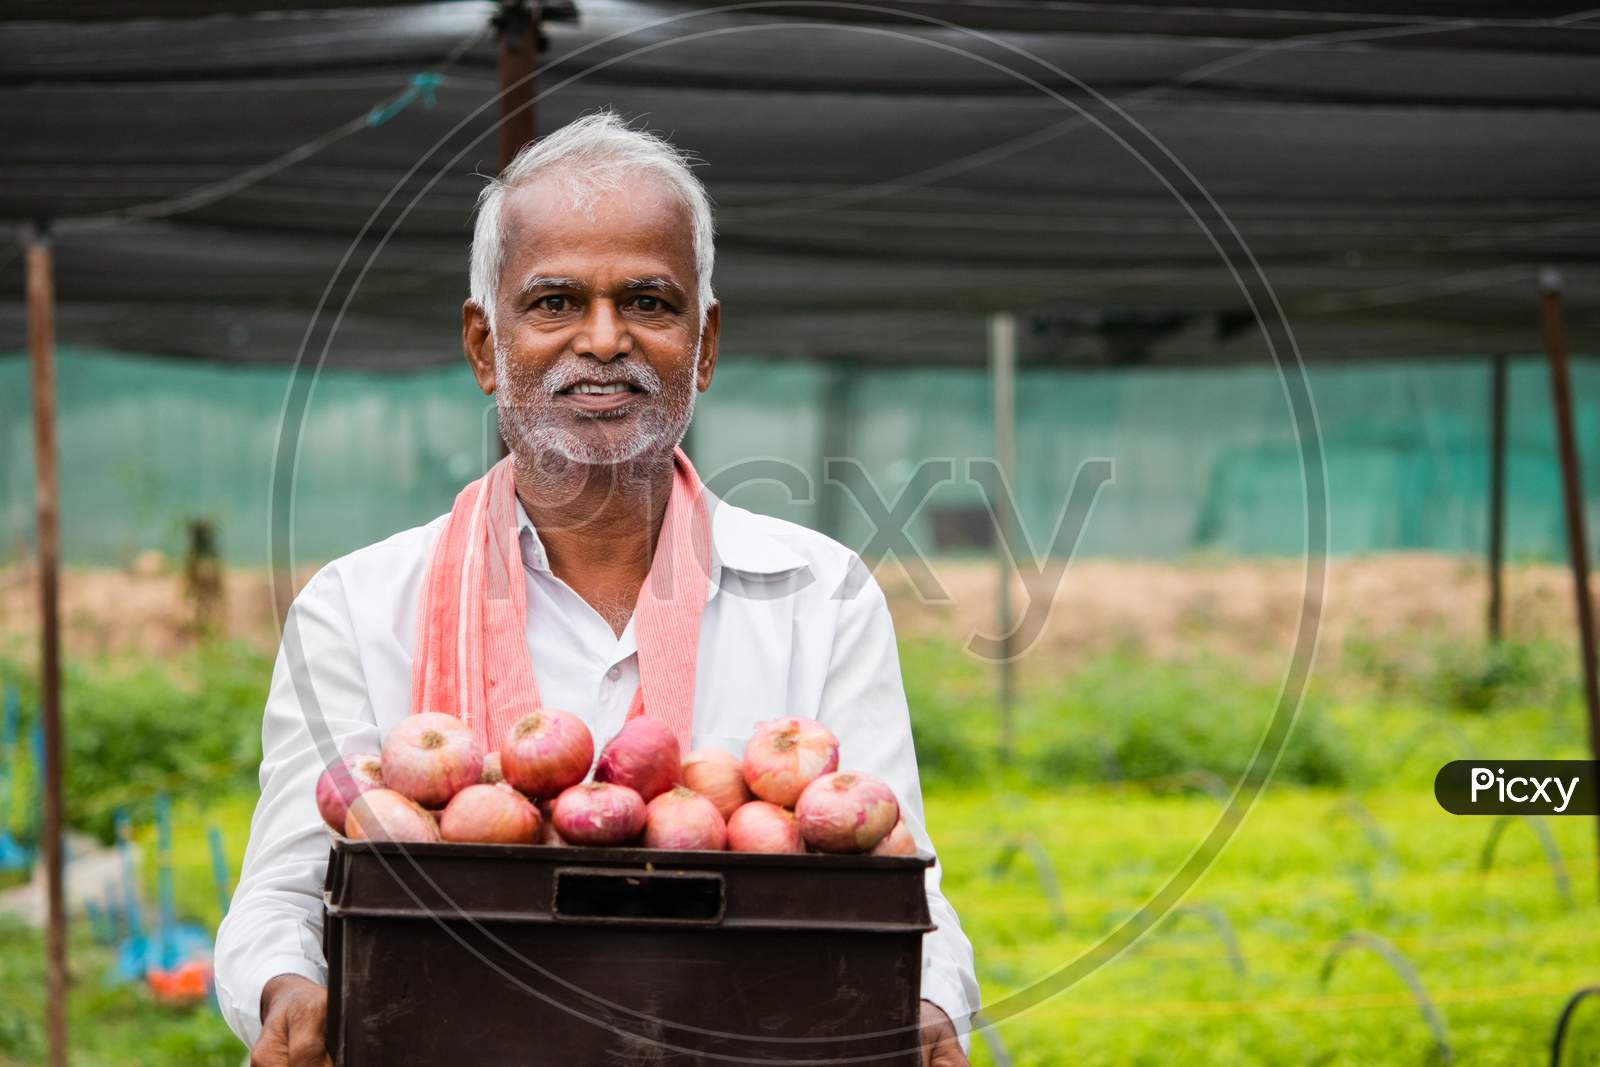 Happy Smiling Indian Farmer Holding Onions In Tray At Greenhouse Or Polyhouse - Cocept Of Good Crop Growth And Profit In Agribusiness.